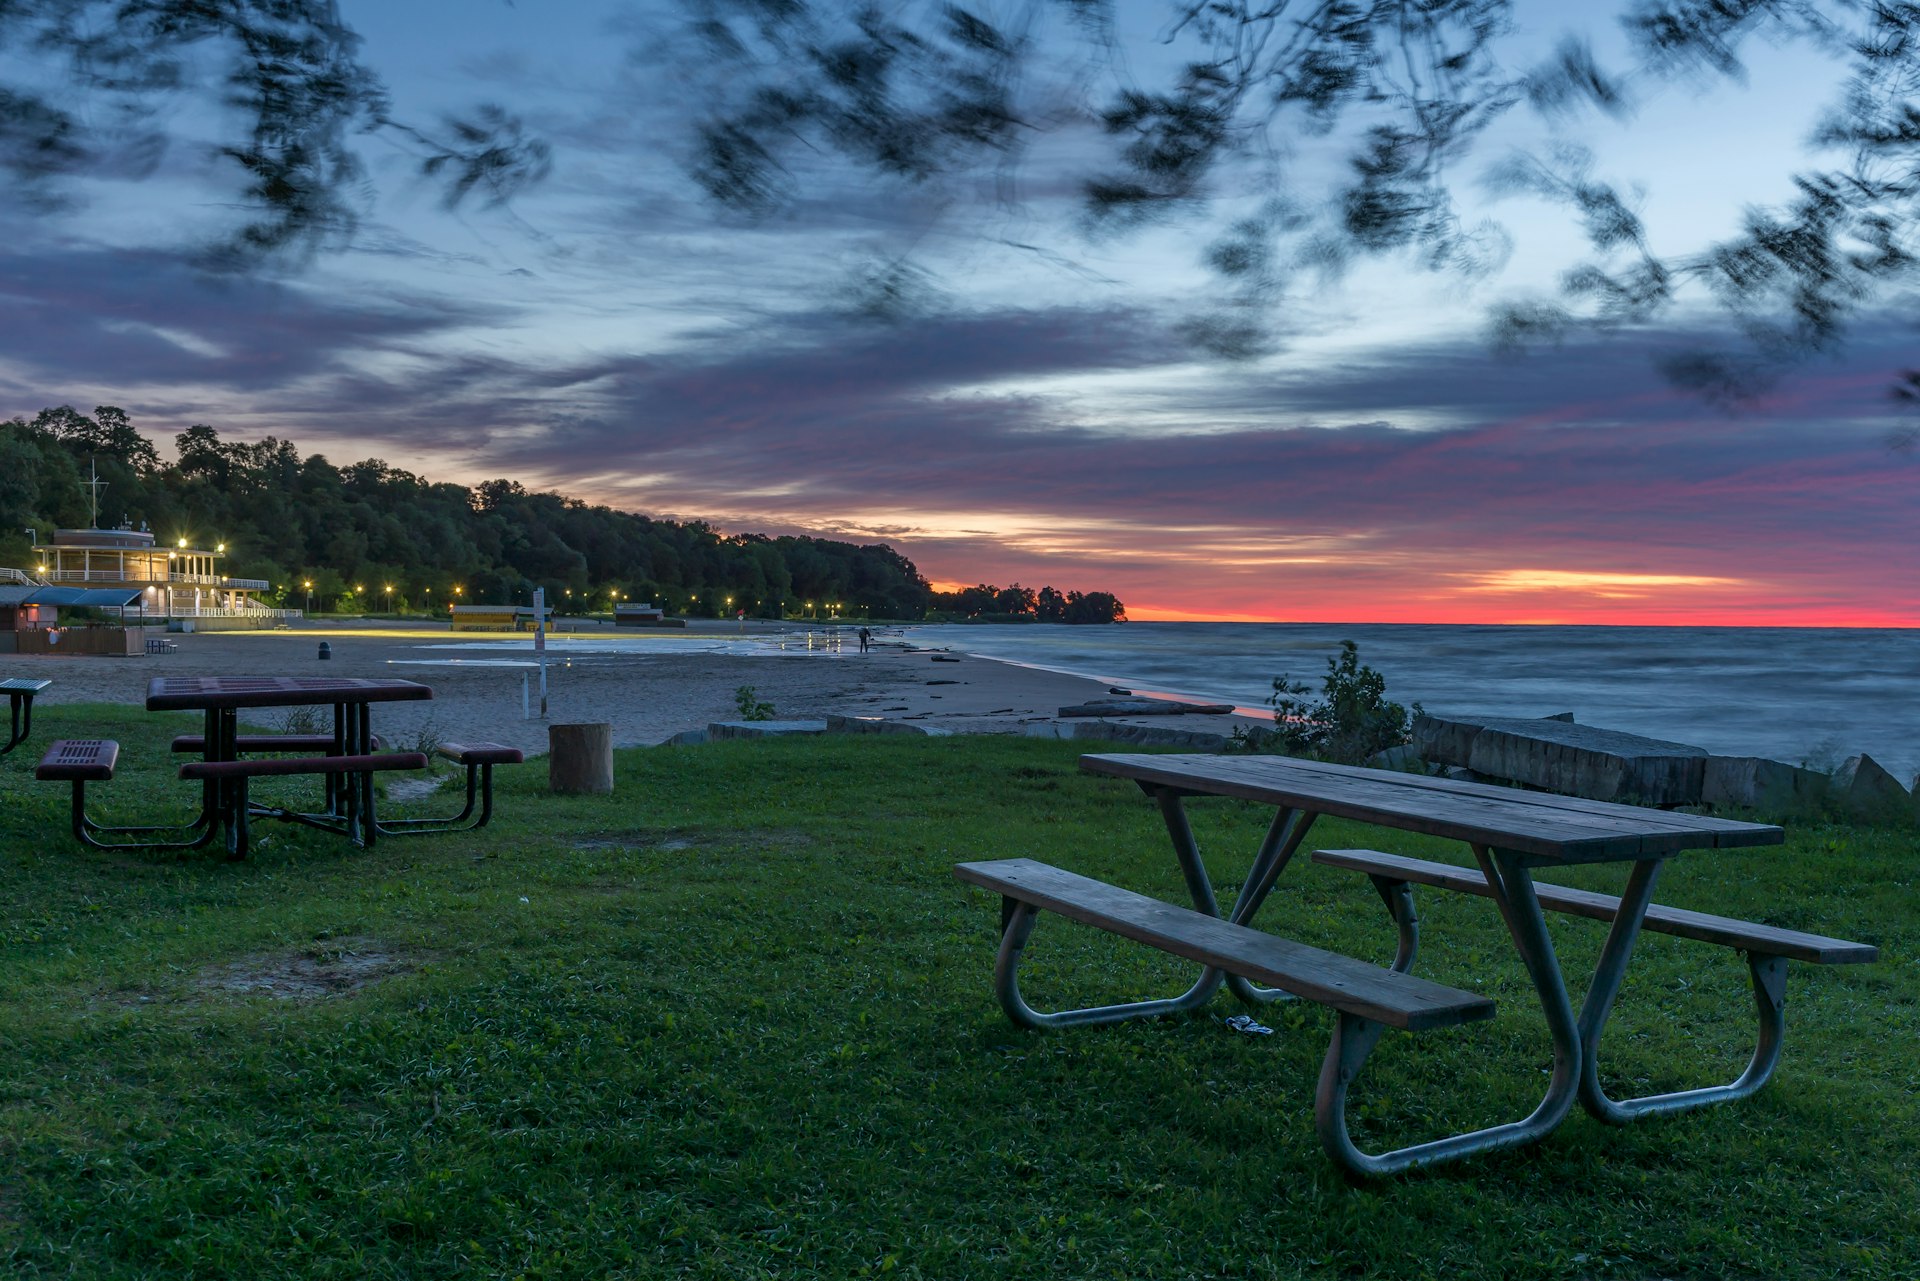 The sun rises over a beach lined with picnic benches